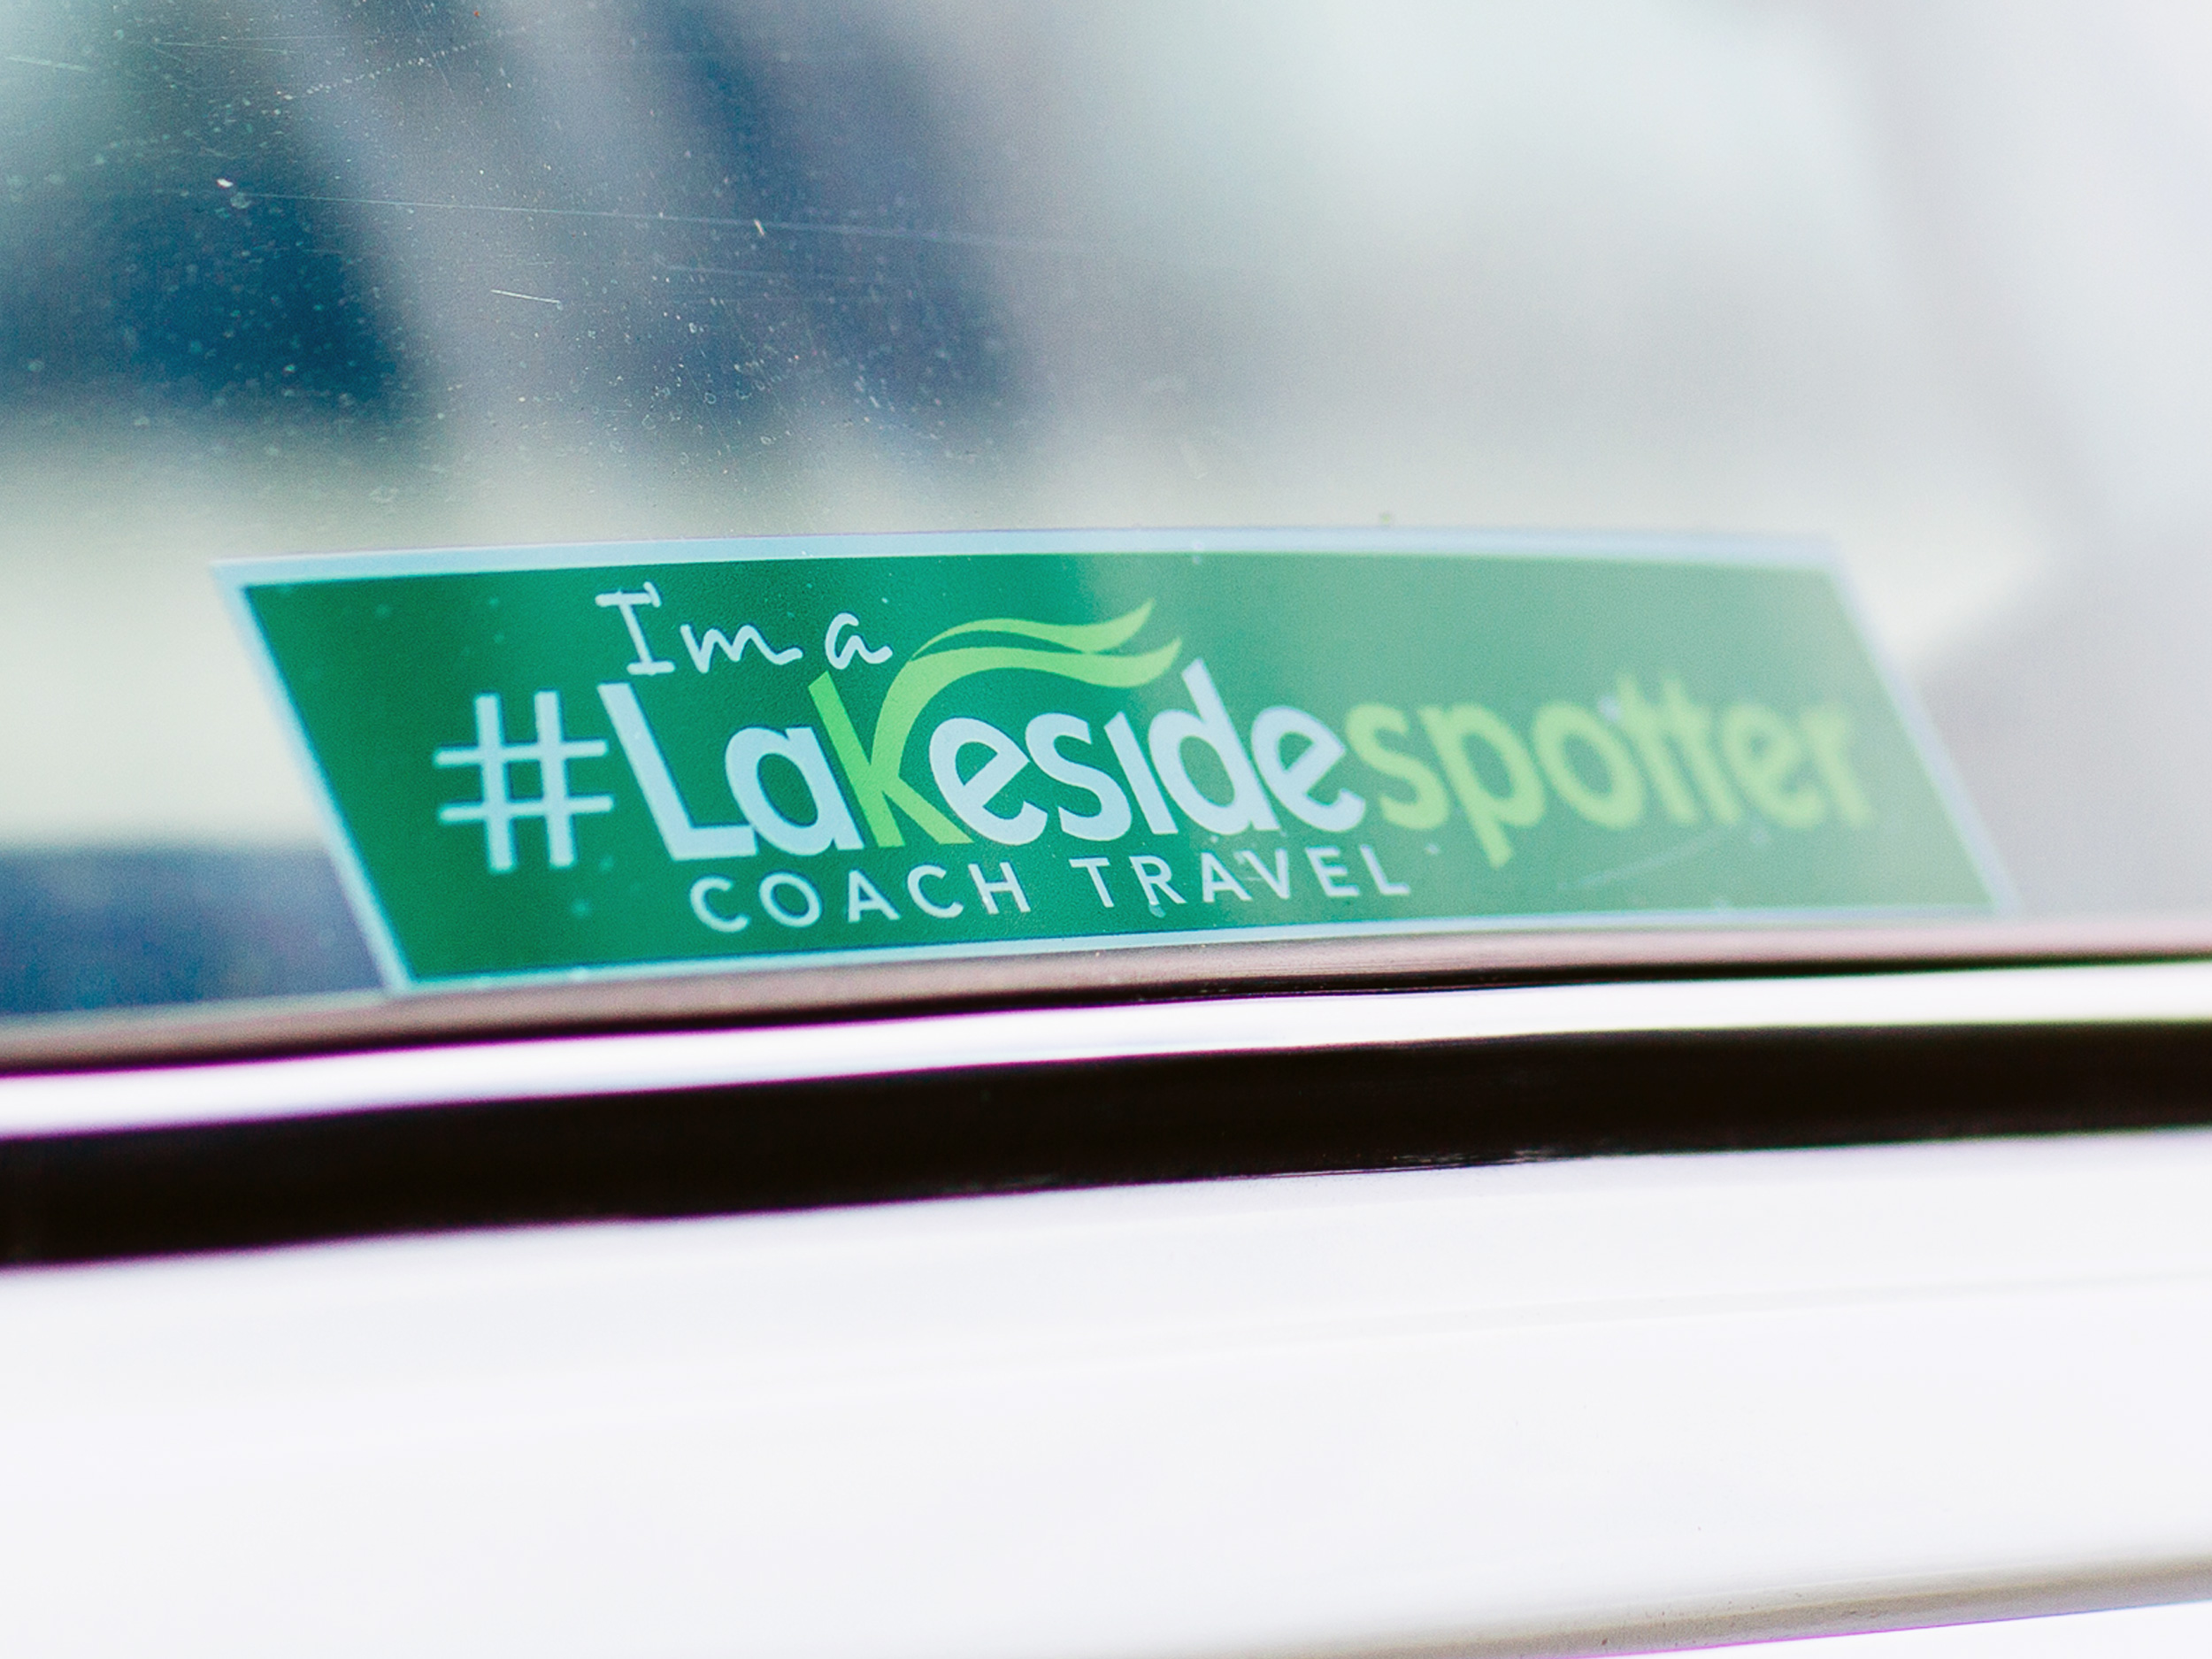 Lakeside Coaches car stickers